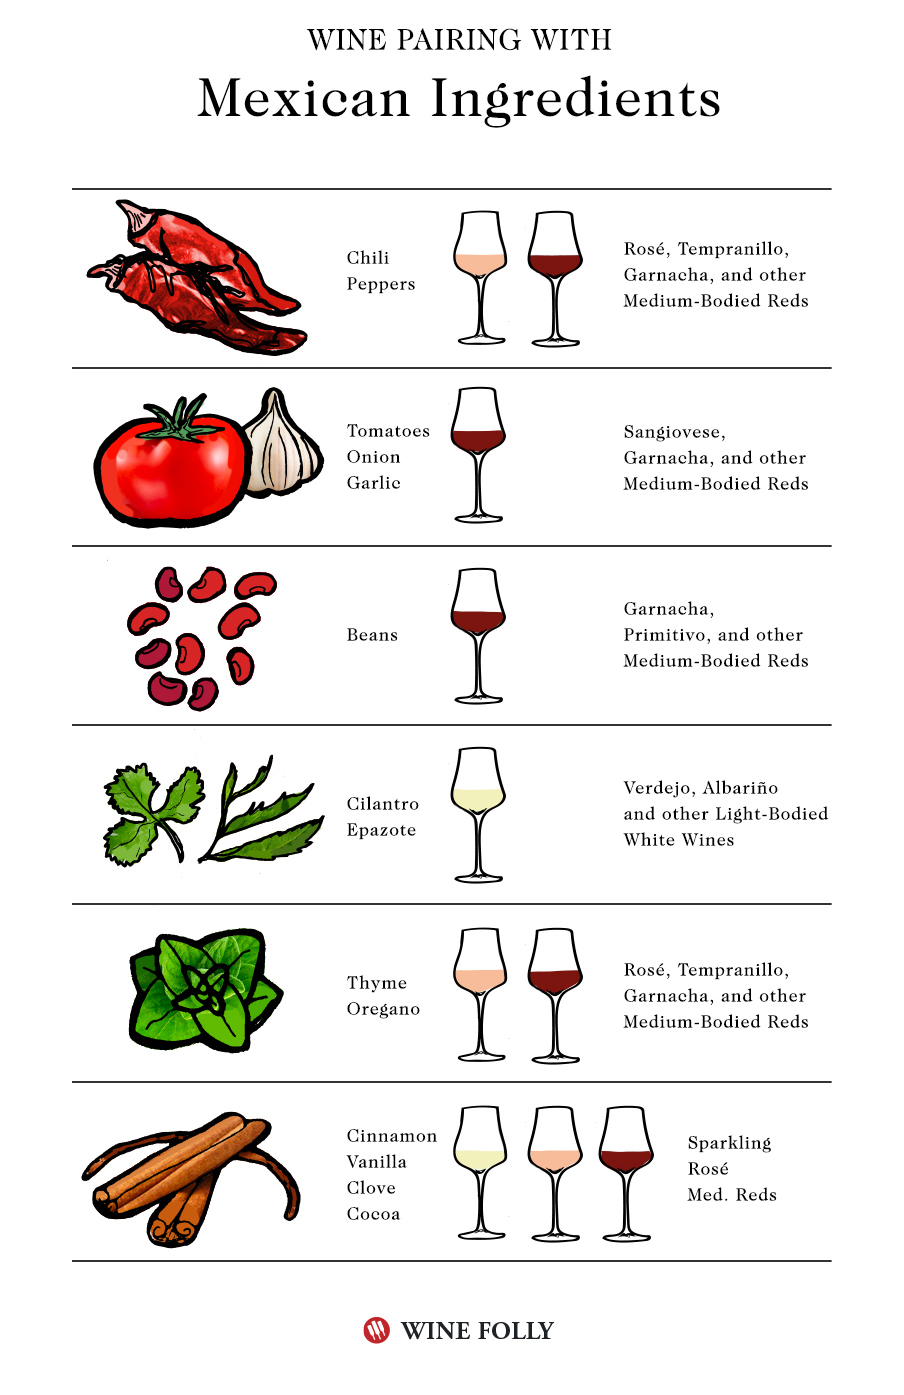 Mexican food wine pairings with ingredients - infographic by Wine Folly